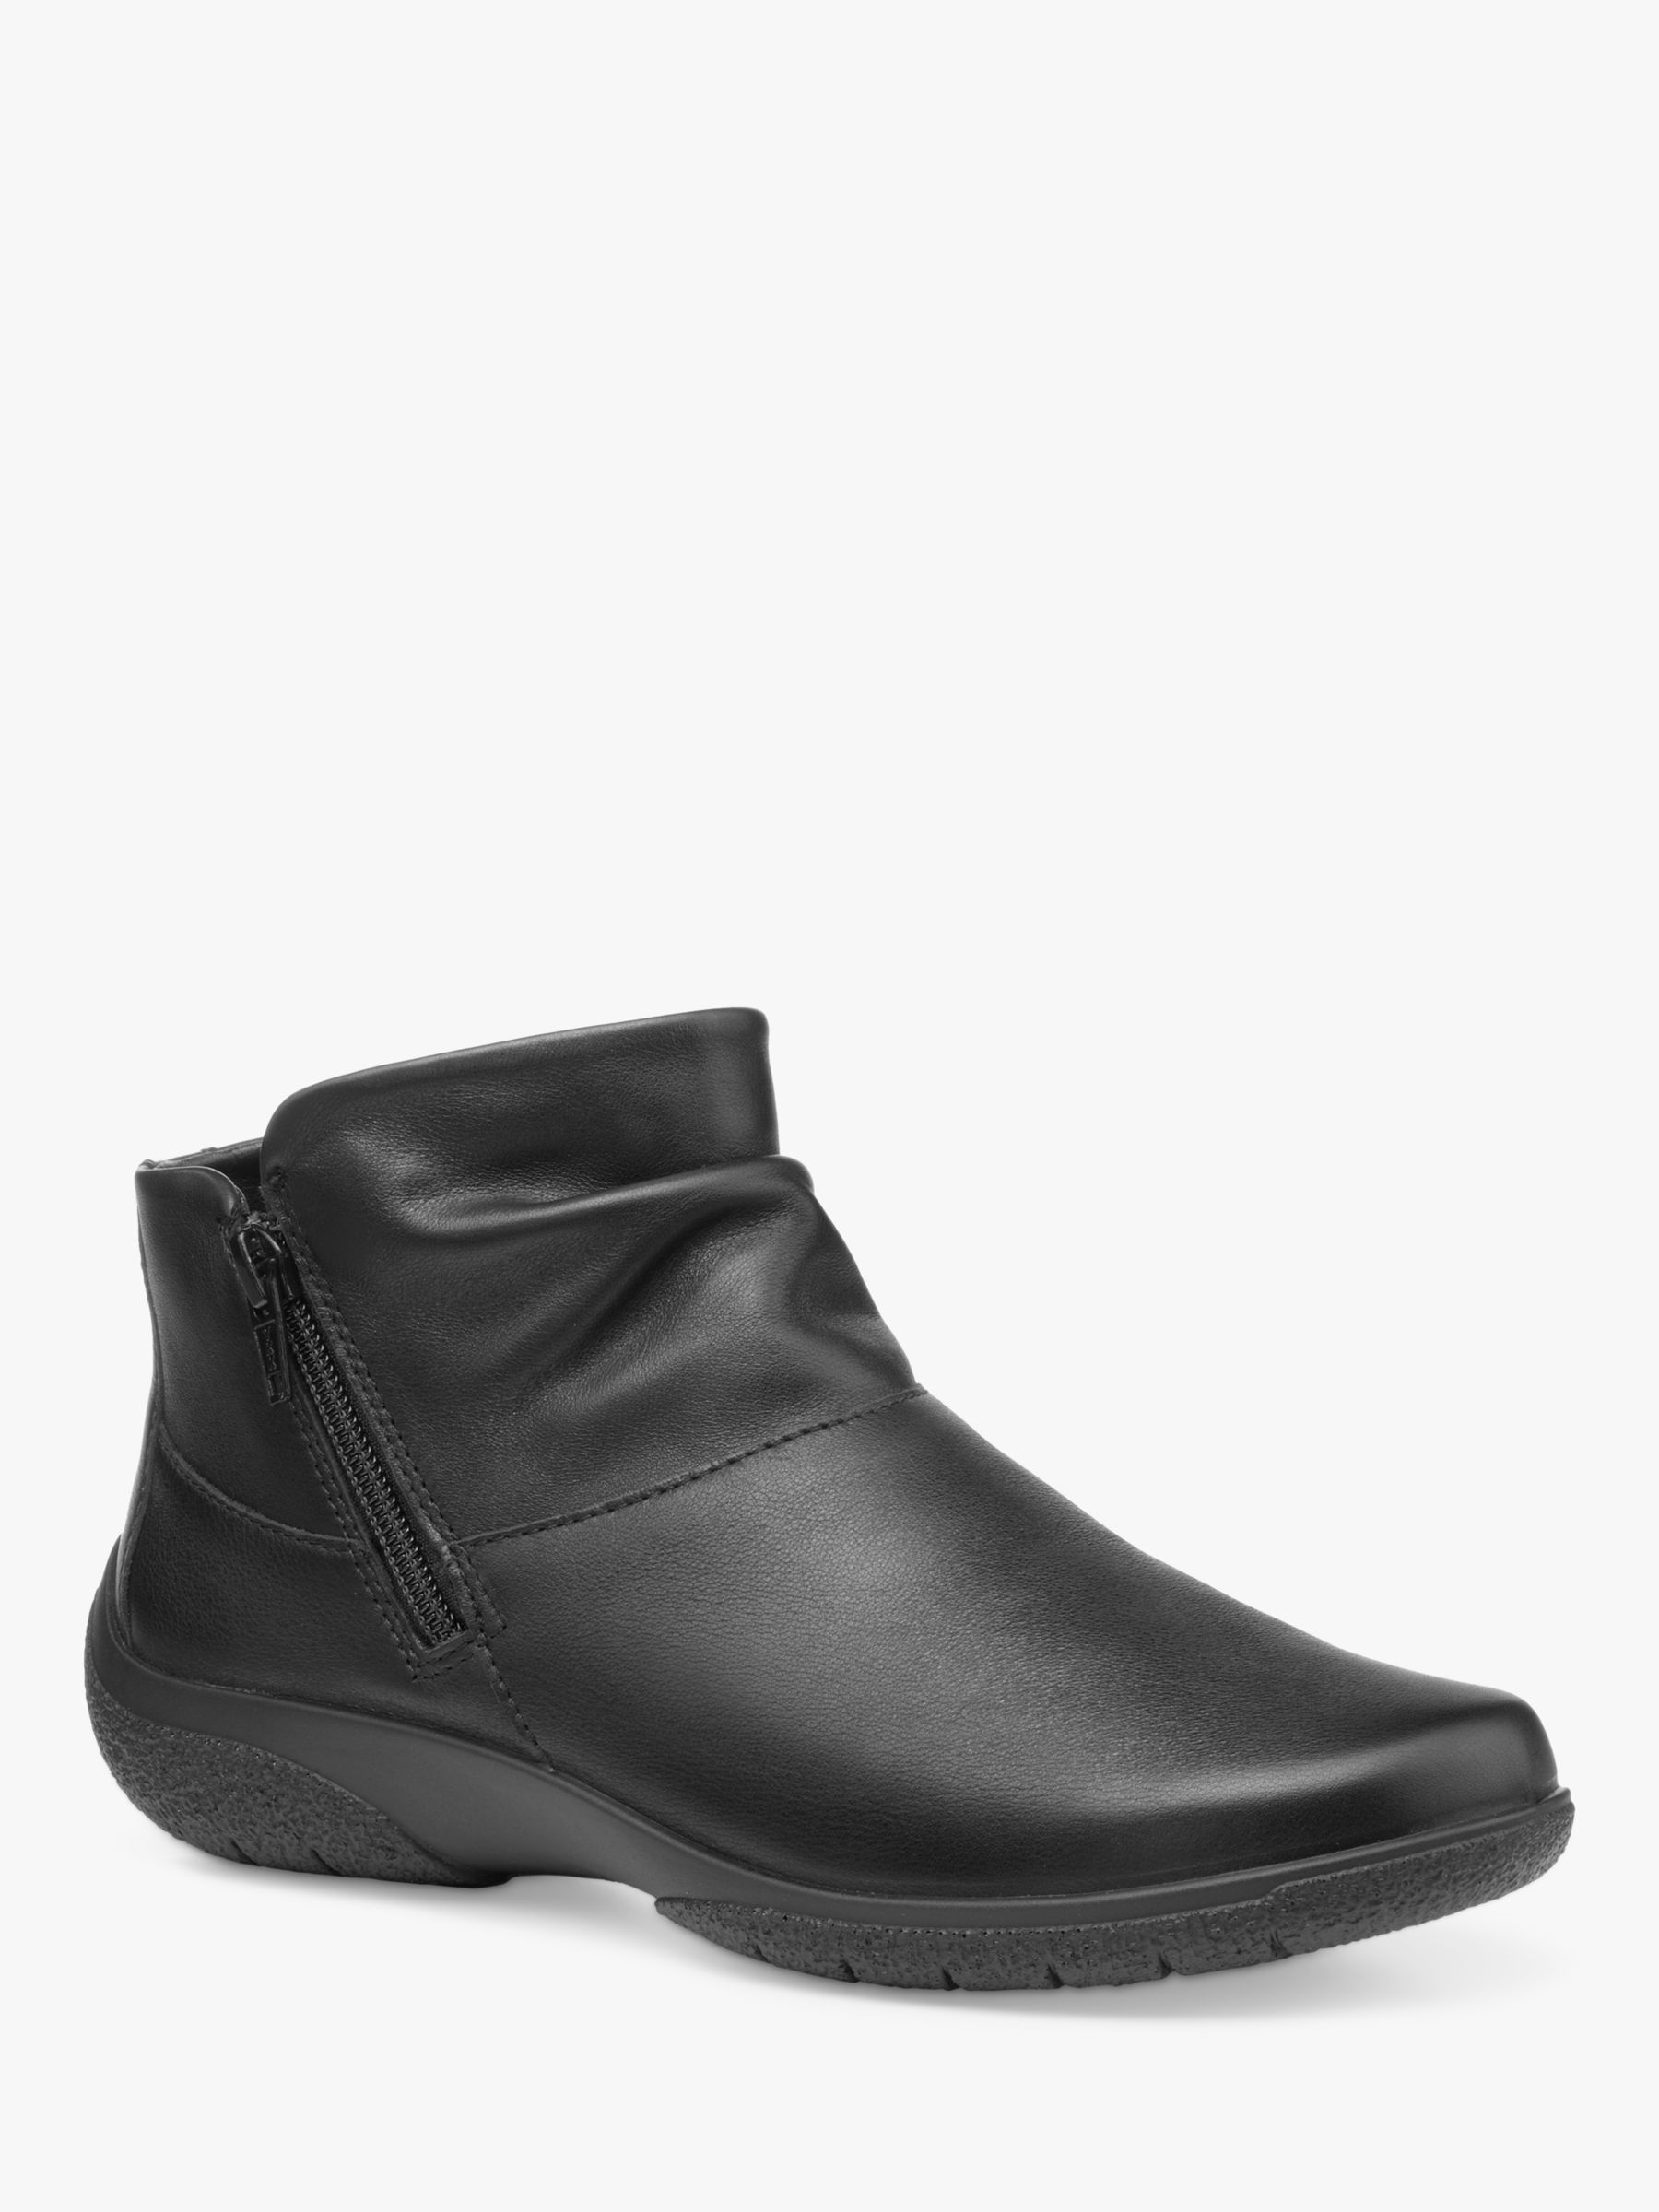 Buy Hotter Murmur Wide Fit Leather Ankle Boots, Black Online at johnlewis.com